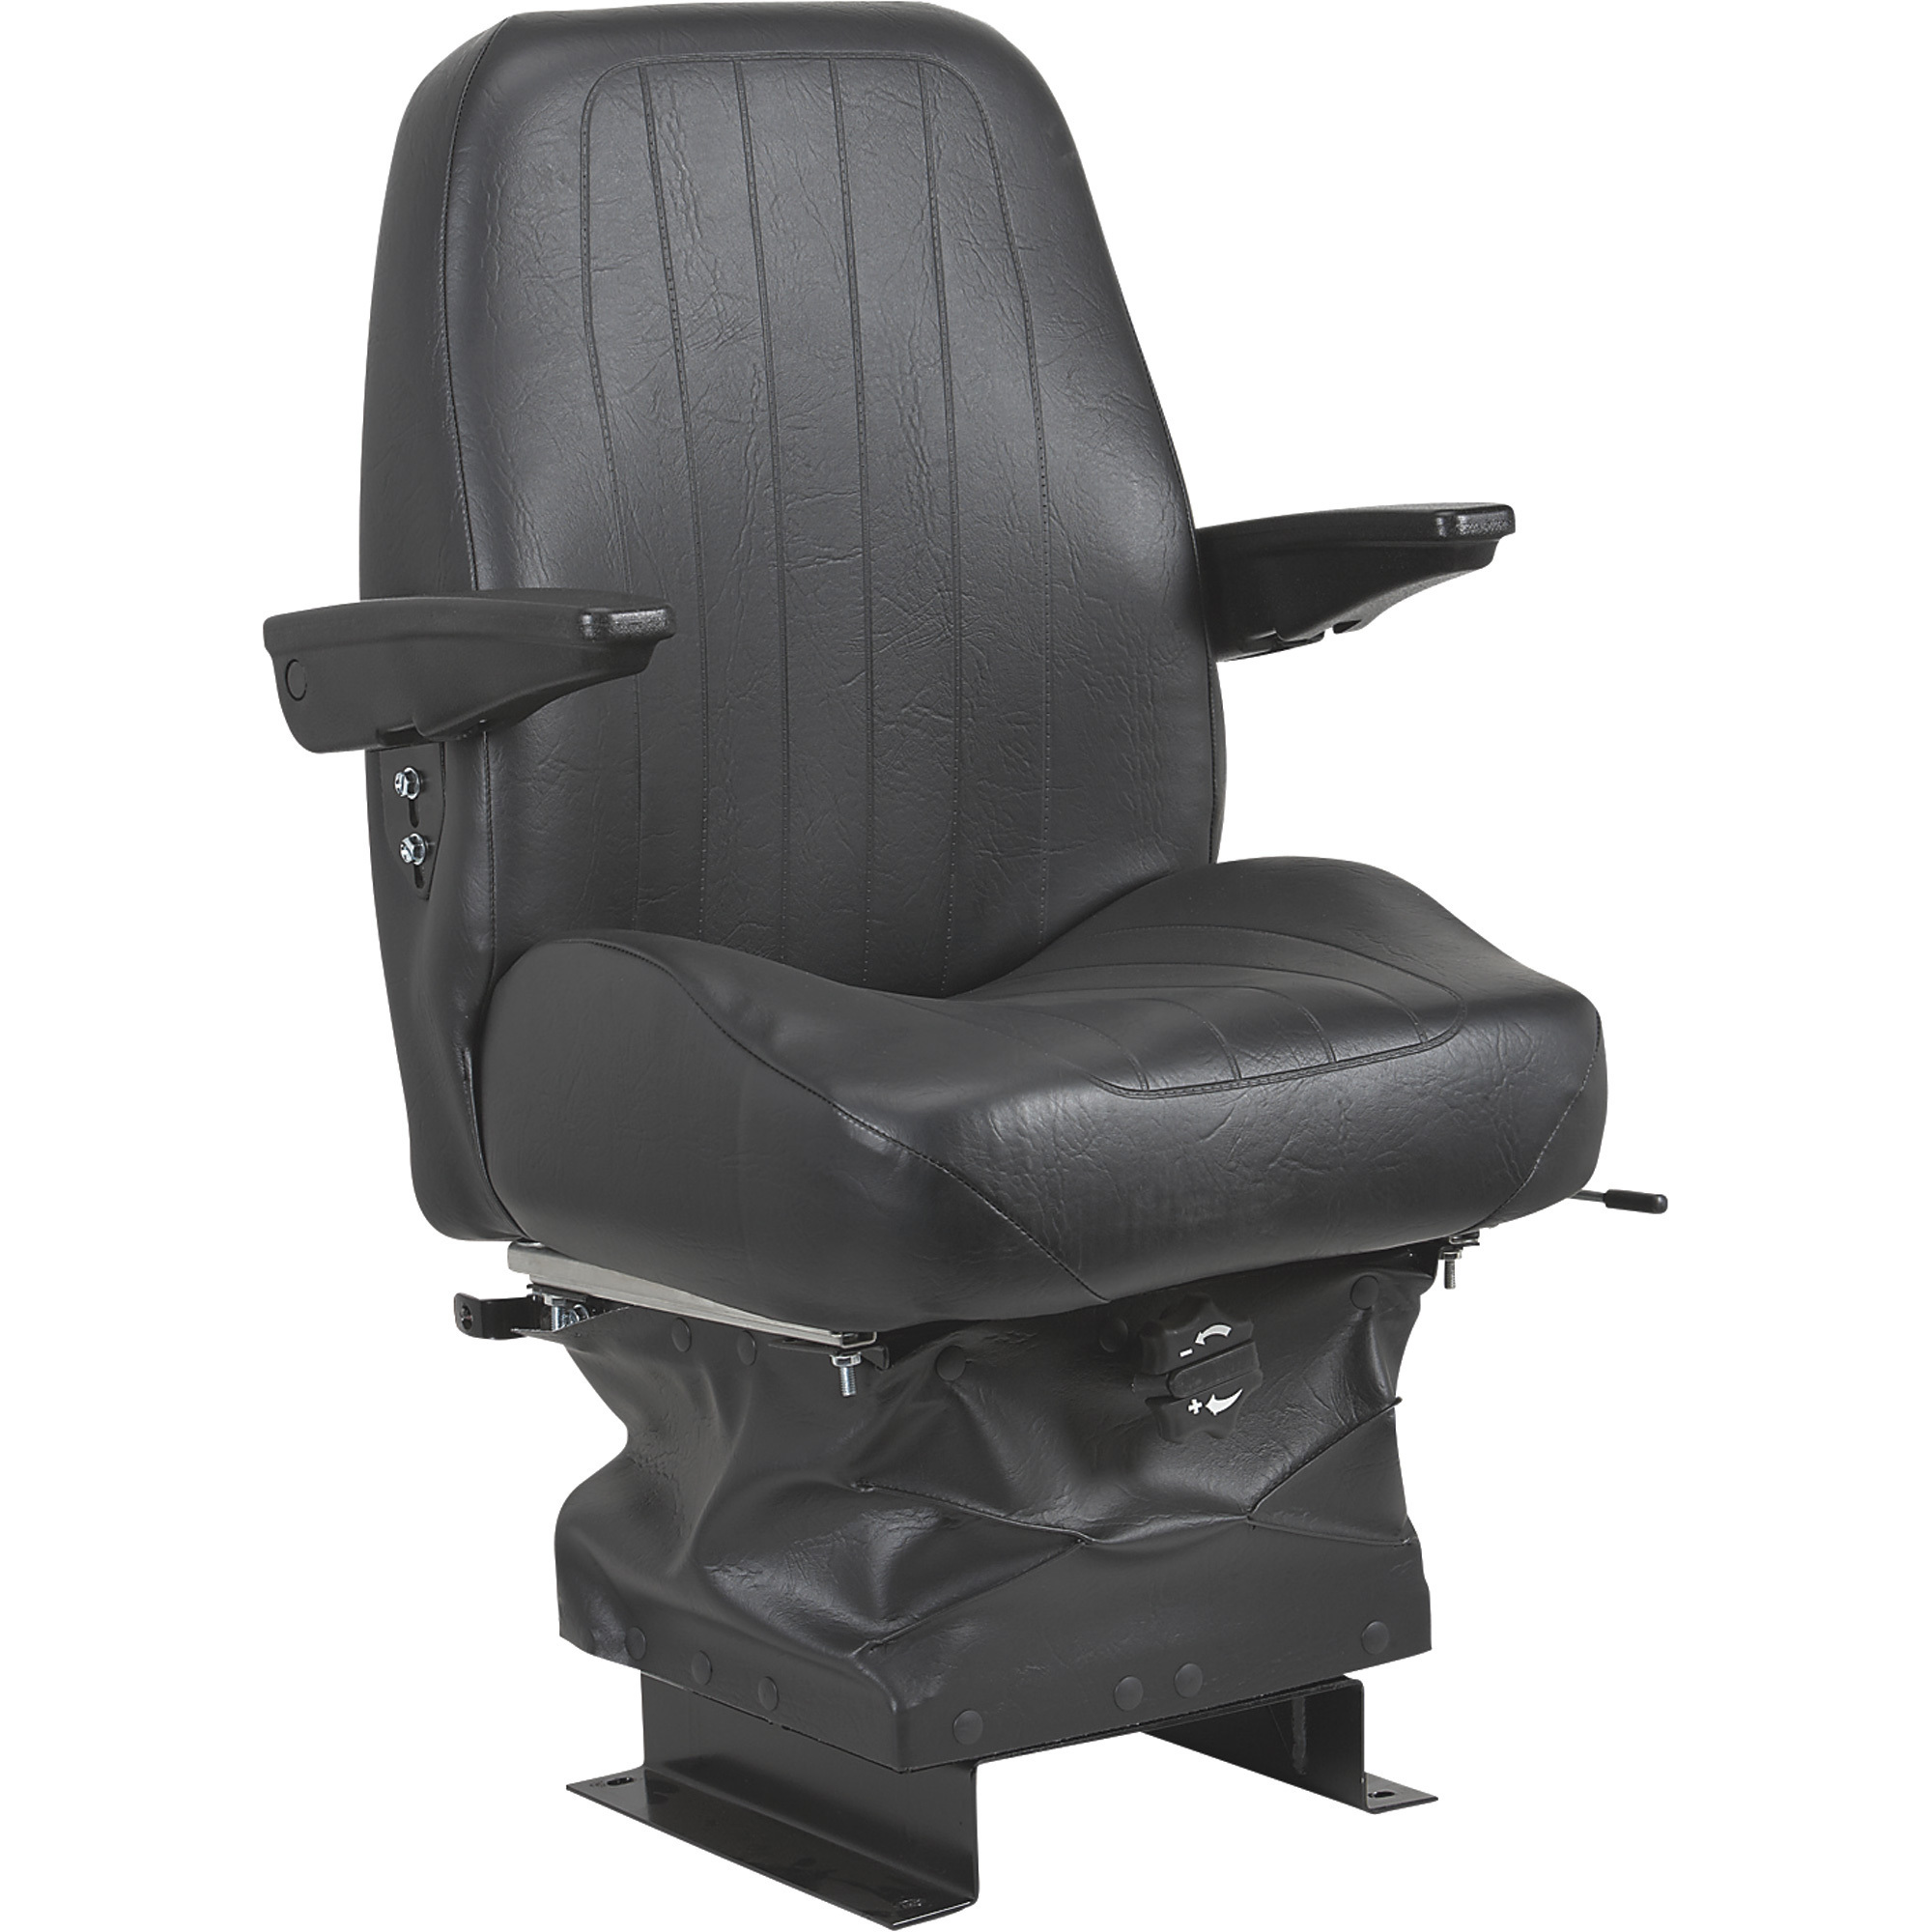 Wise Suspension Tractor Seat with Armrests â Black, Model XWM1161